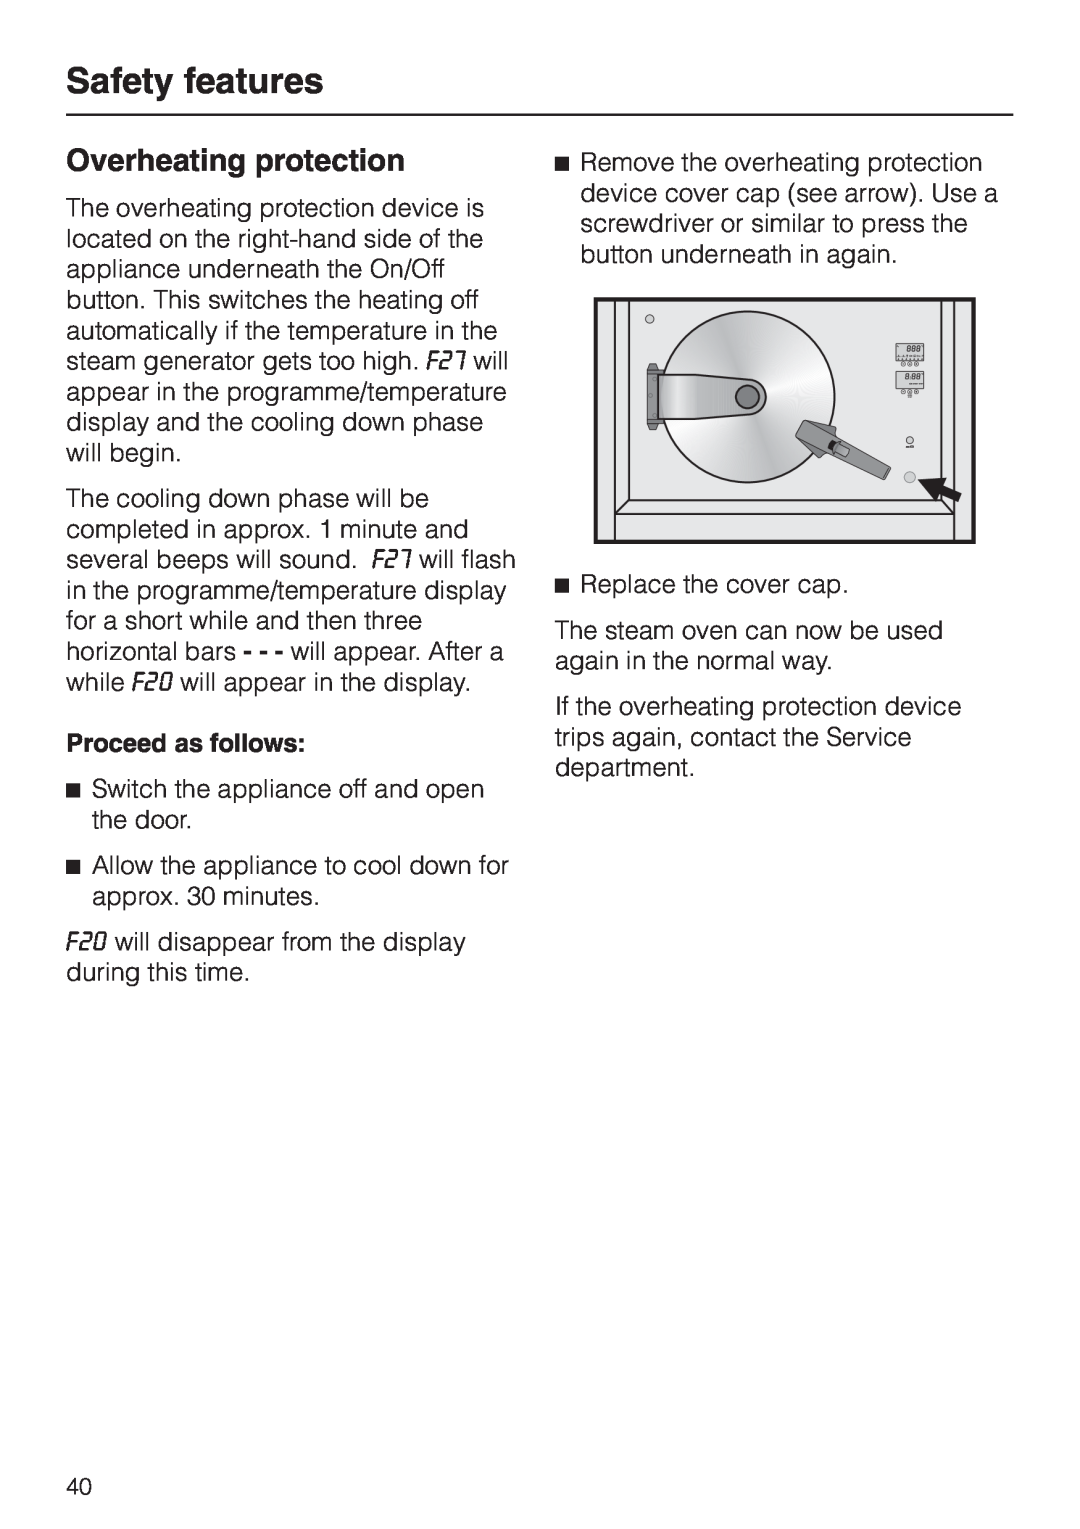 Miele DG 4064 L manual Overheating protection, Safety features 